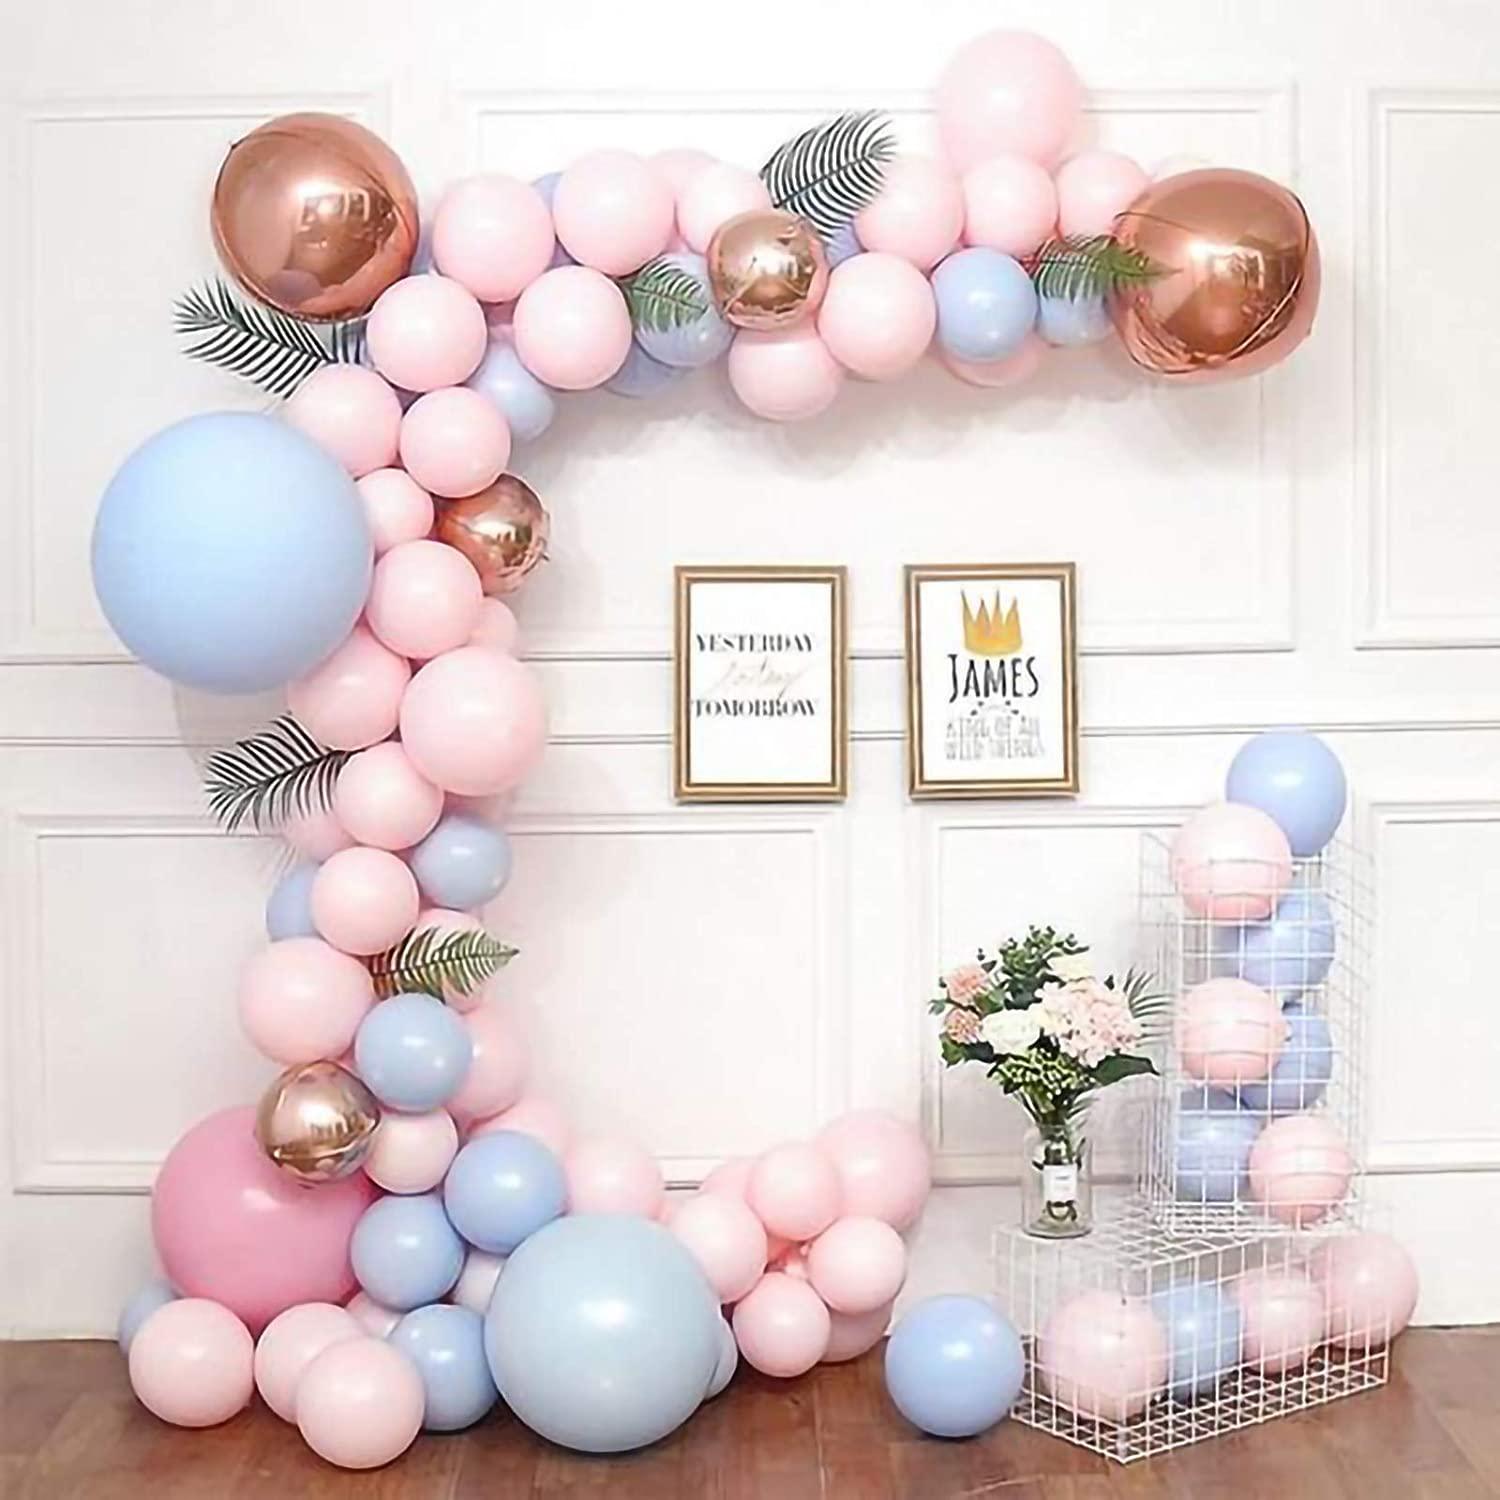 Led Birthday Balloons Home Party Decorations – If you say i do